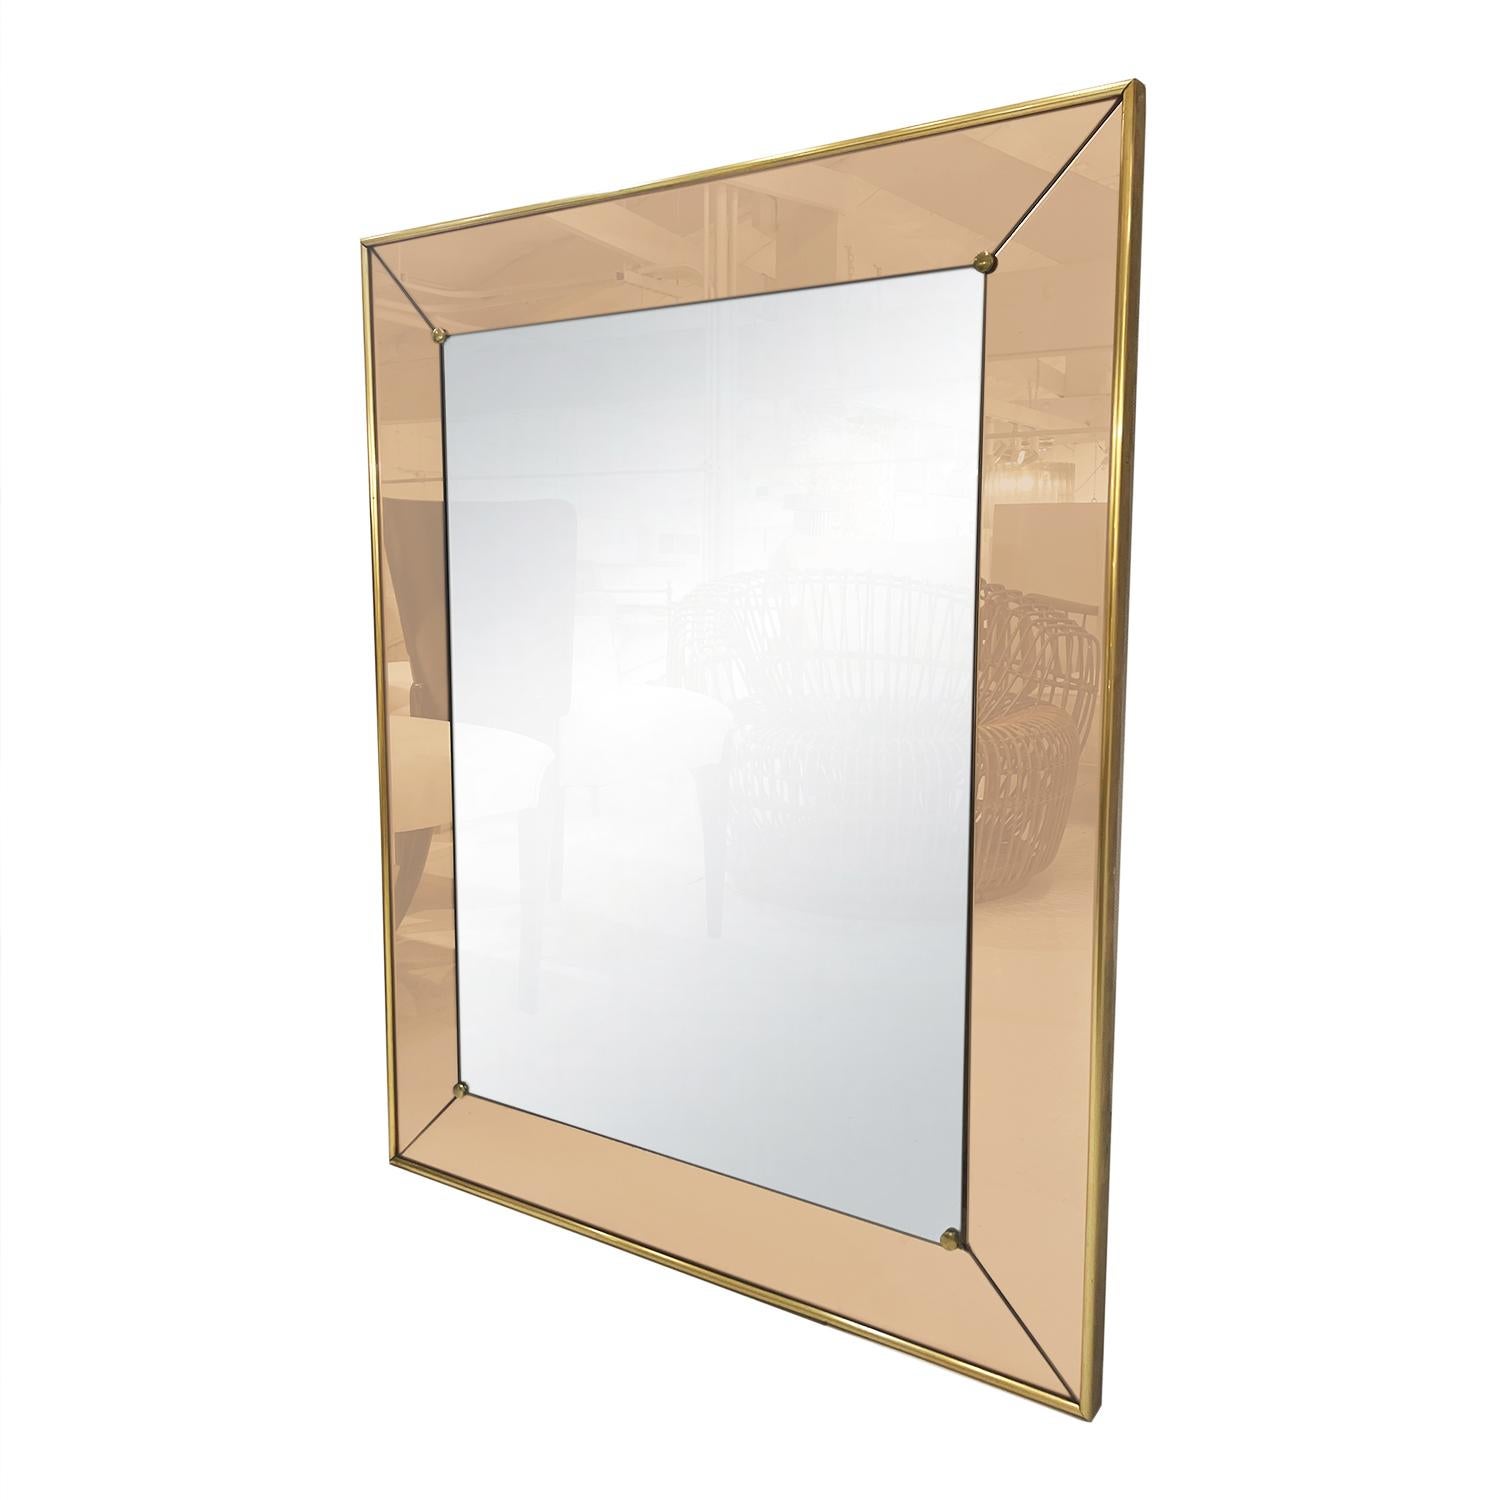 A rectangular, vintage Mid-Century Modern Italian wall mirror made of hand blown colored glass with its original mirror glass, produced by Cristal Art, in good condition. Wear consistent with age and use. circa 1960, Turin, Italy.

Cristal Art was